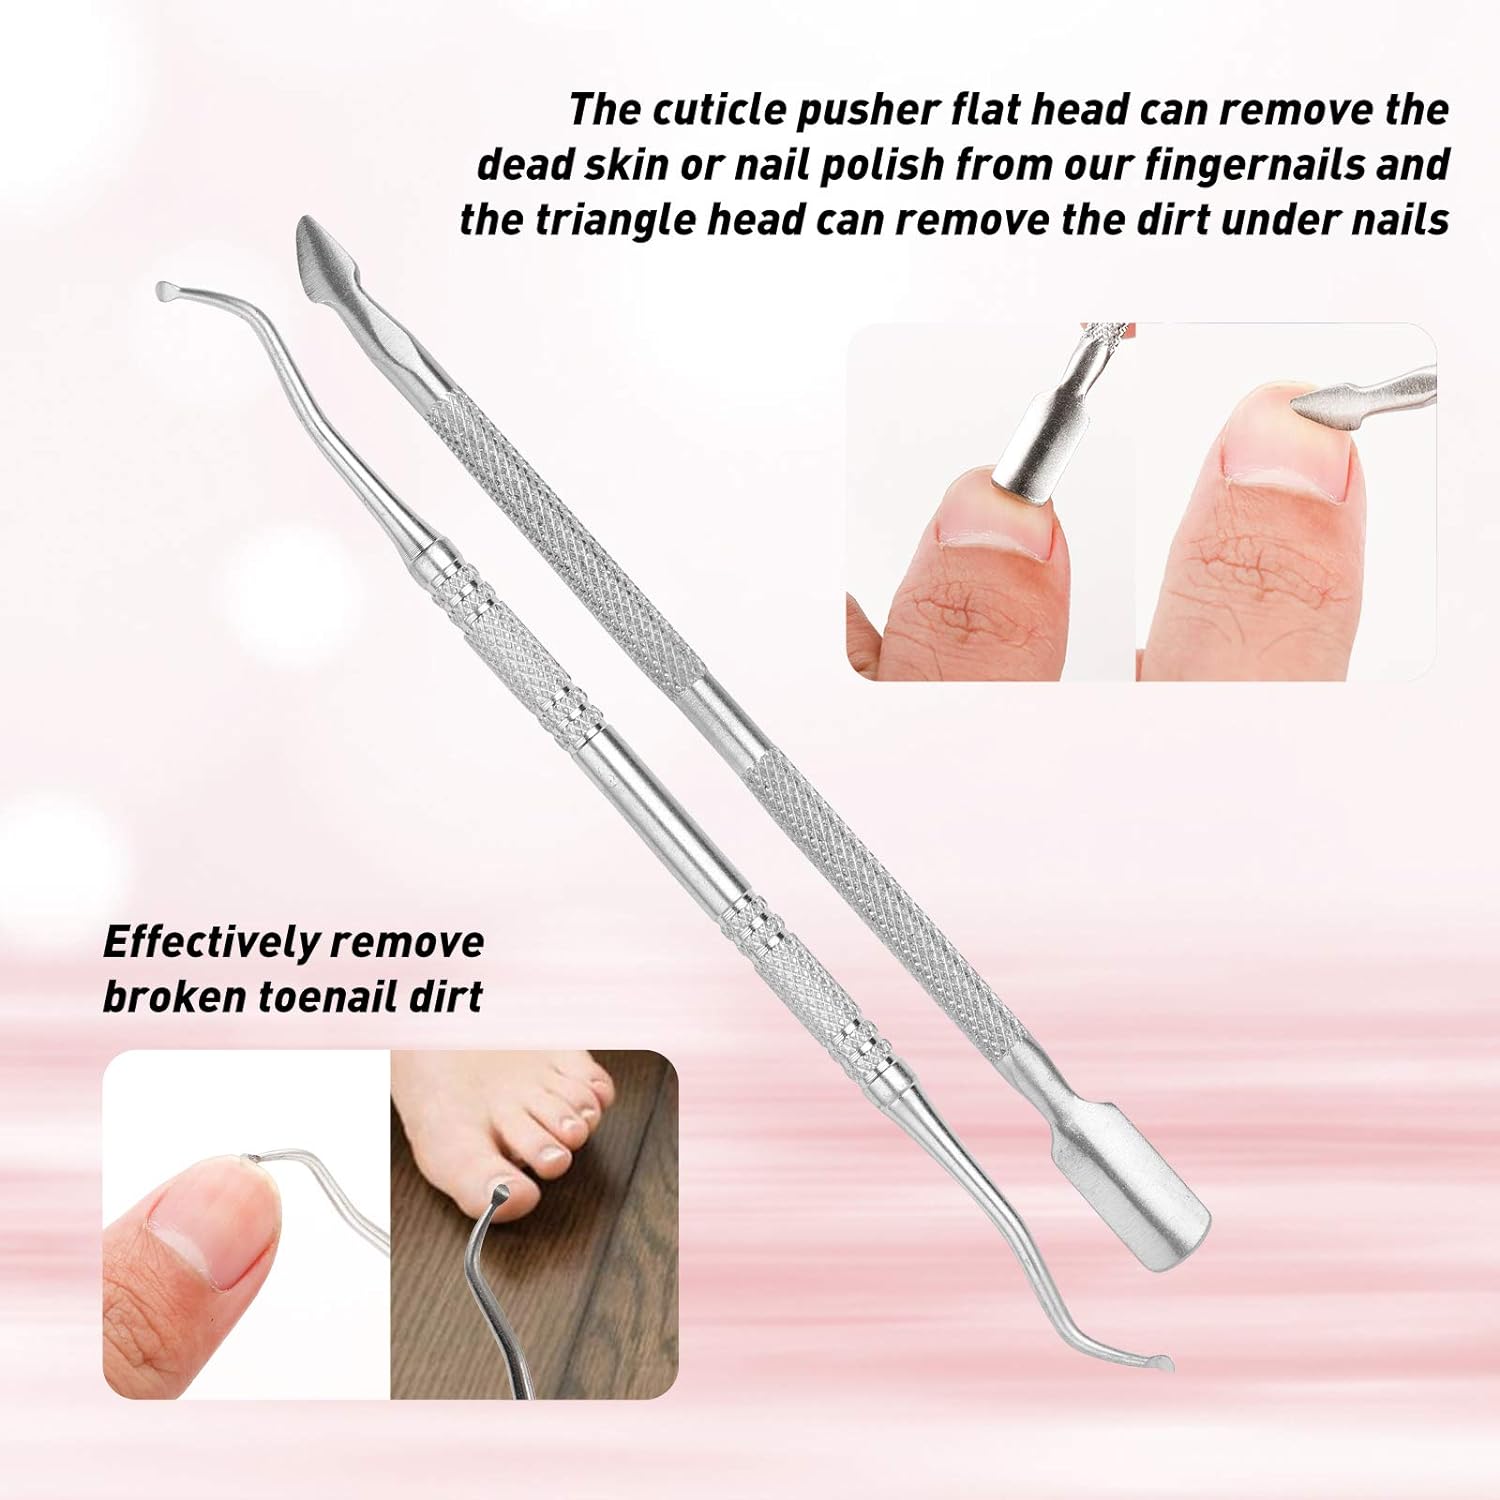 Stainless Steel Spider Pedicure Foot Beauty Pedicure Tool, Cuticle